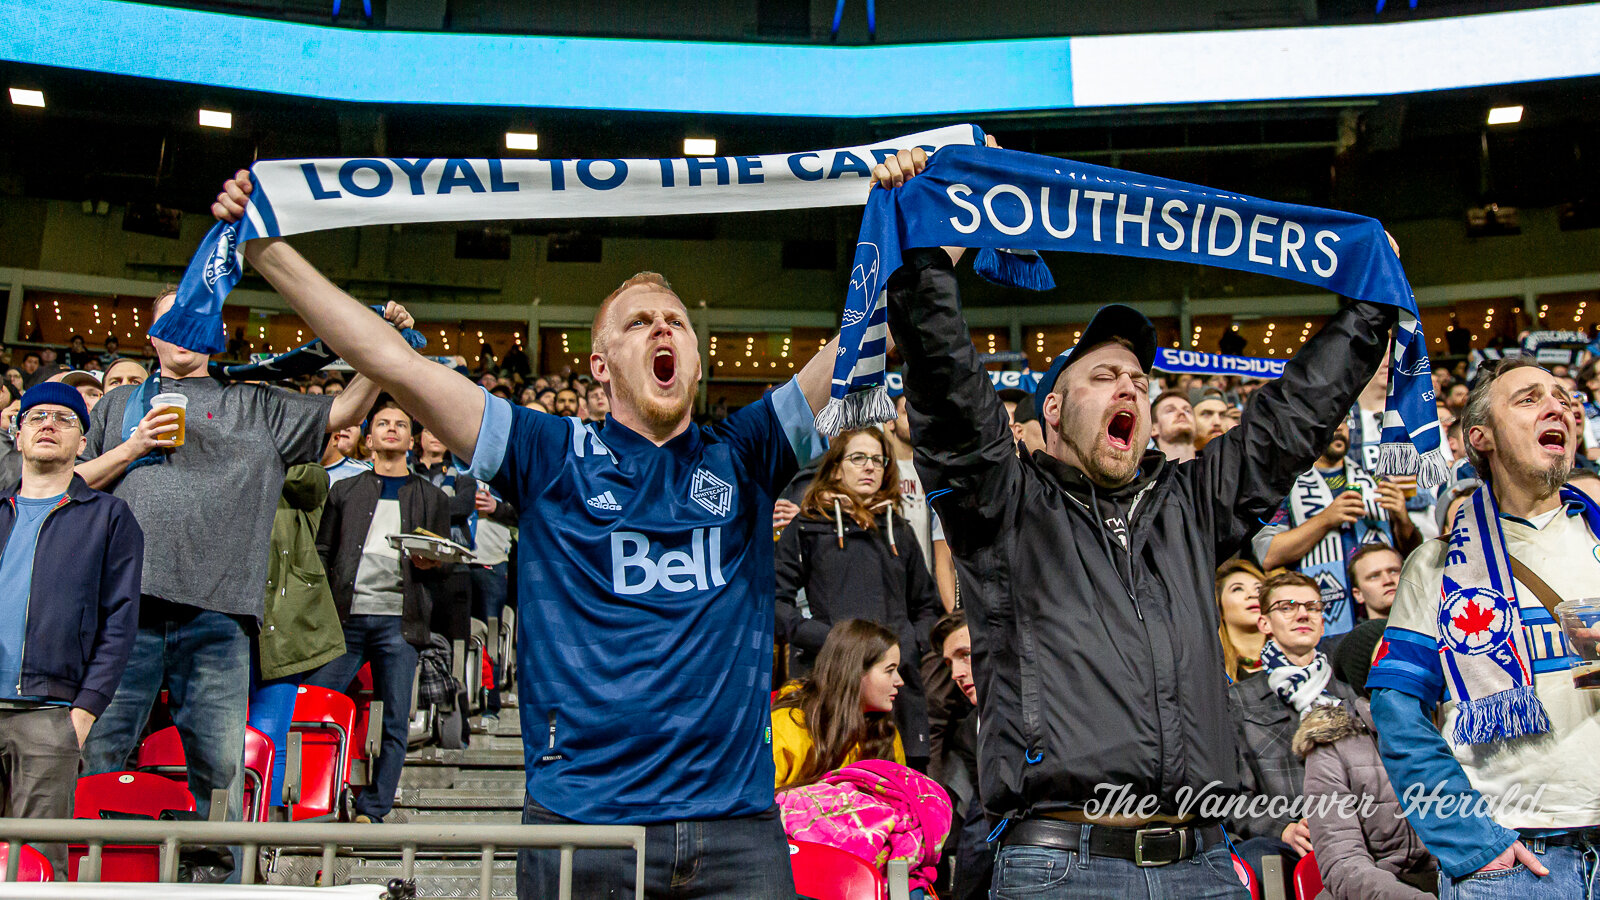 2020-02-29 Vancouver Southsiders 01.jpg